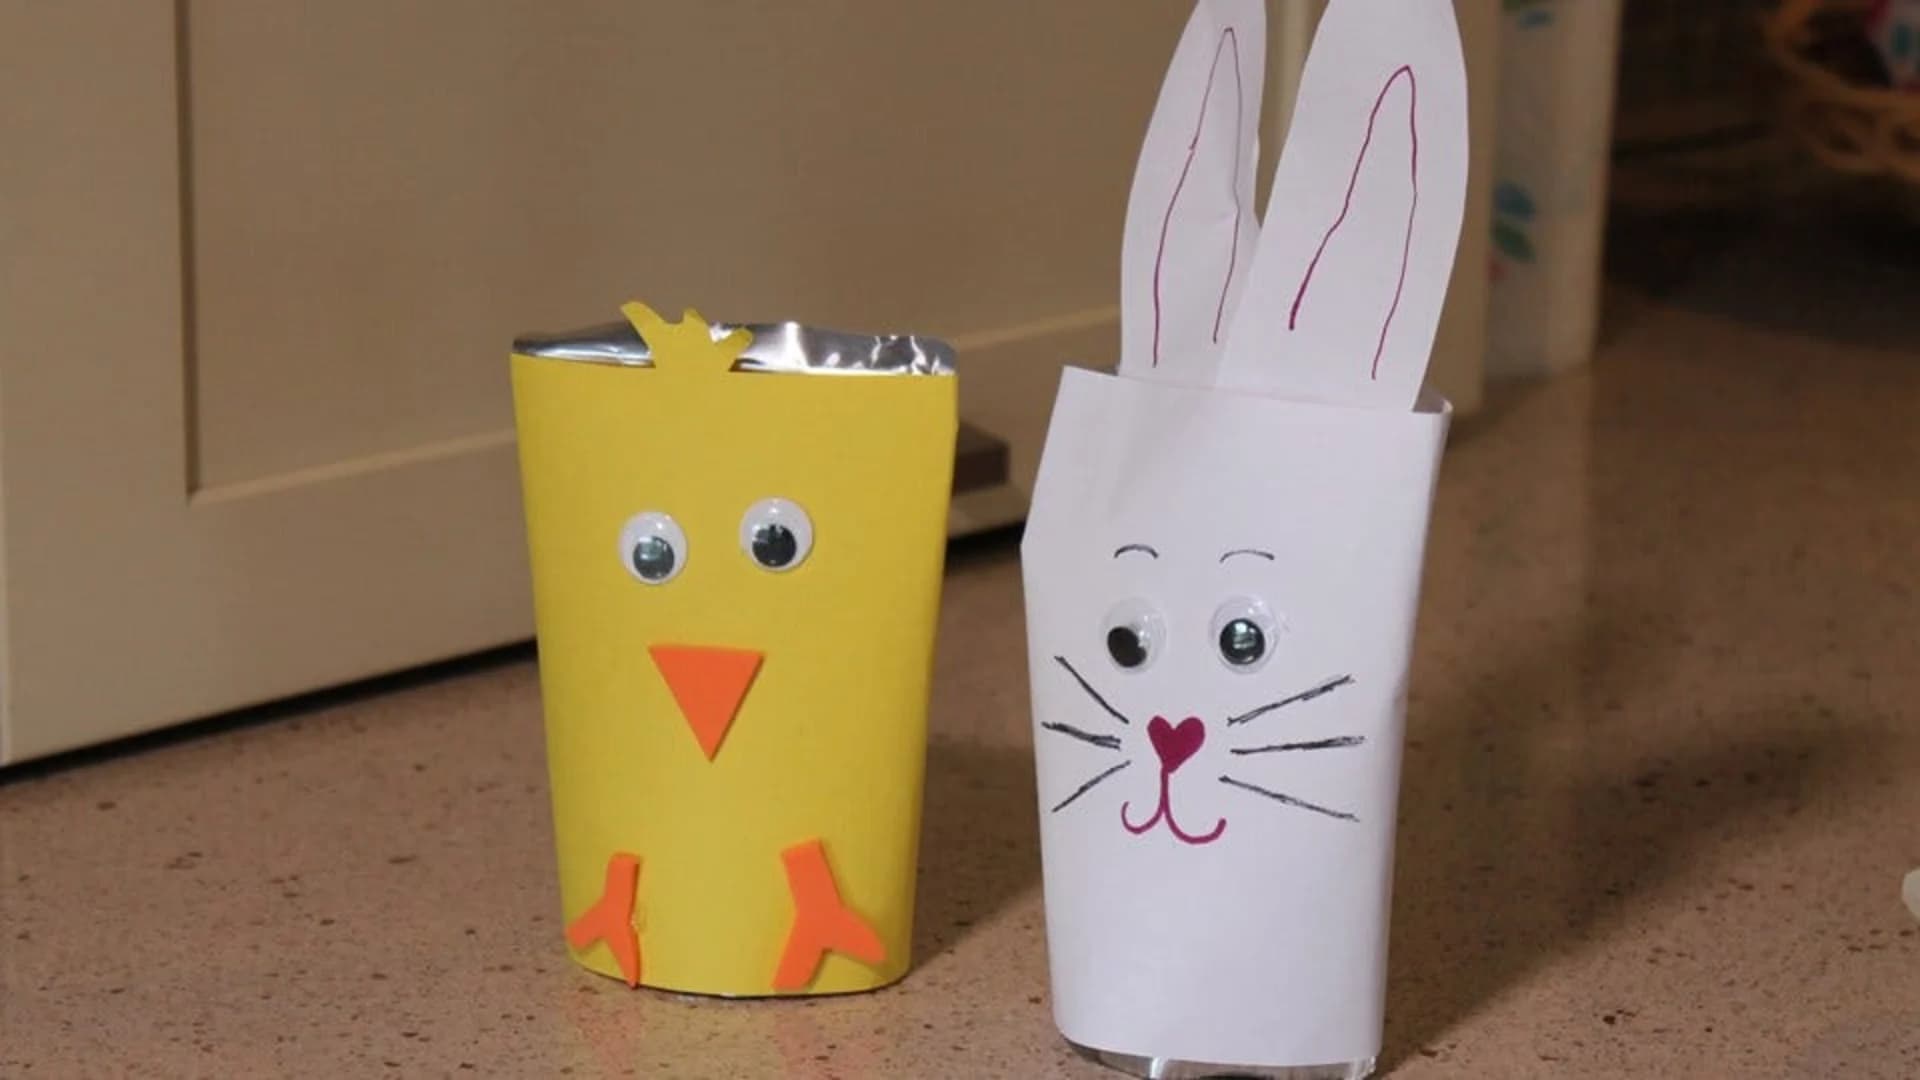 8 ways to make Easter 'Egg-Cellent' in your home